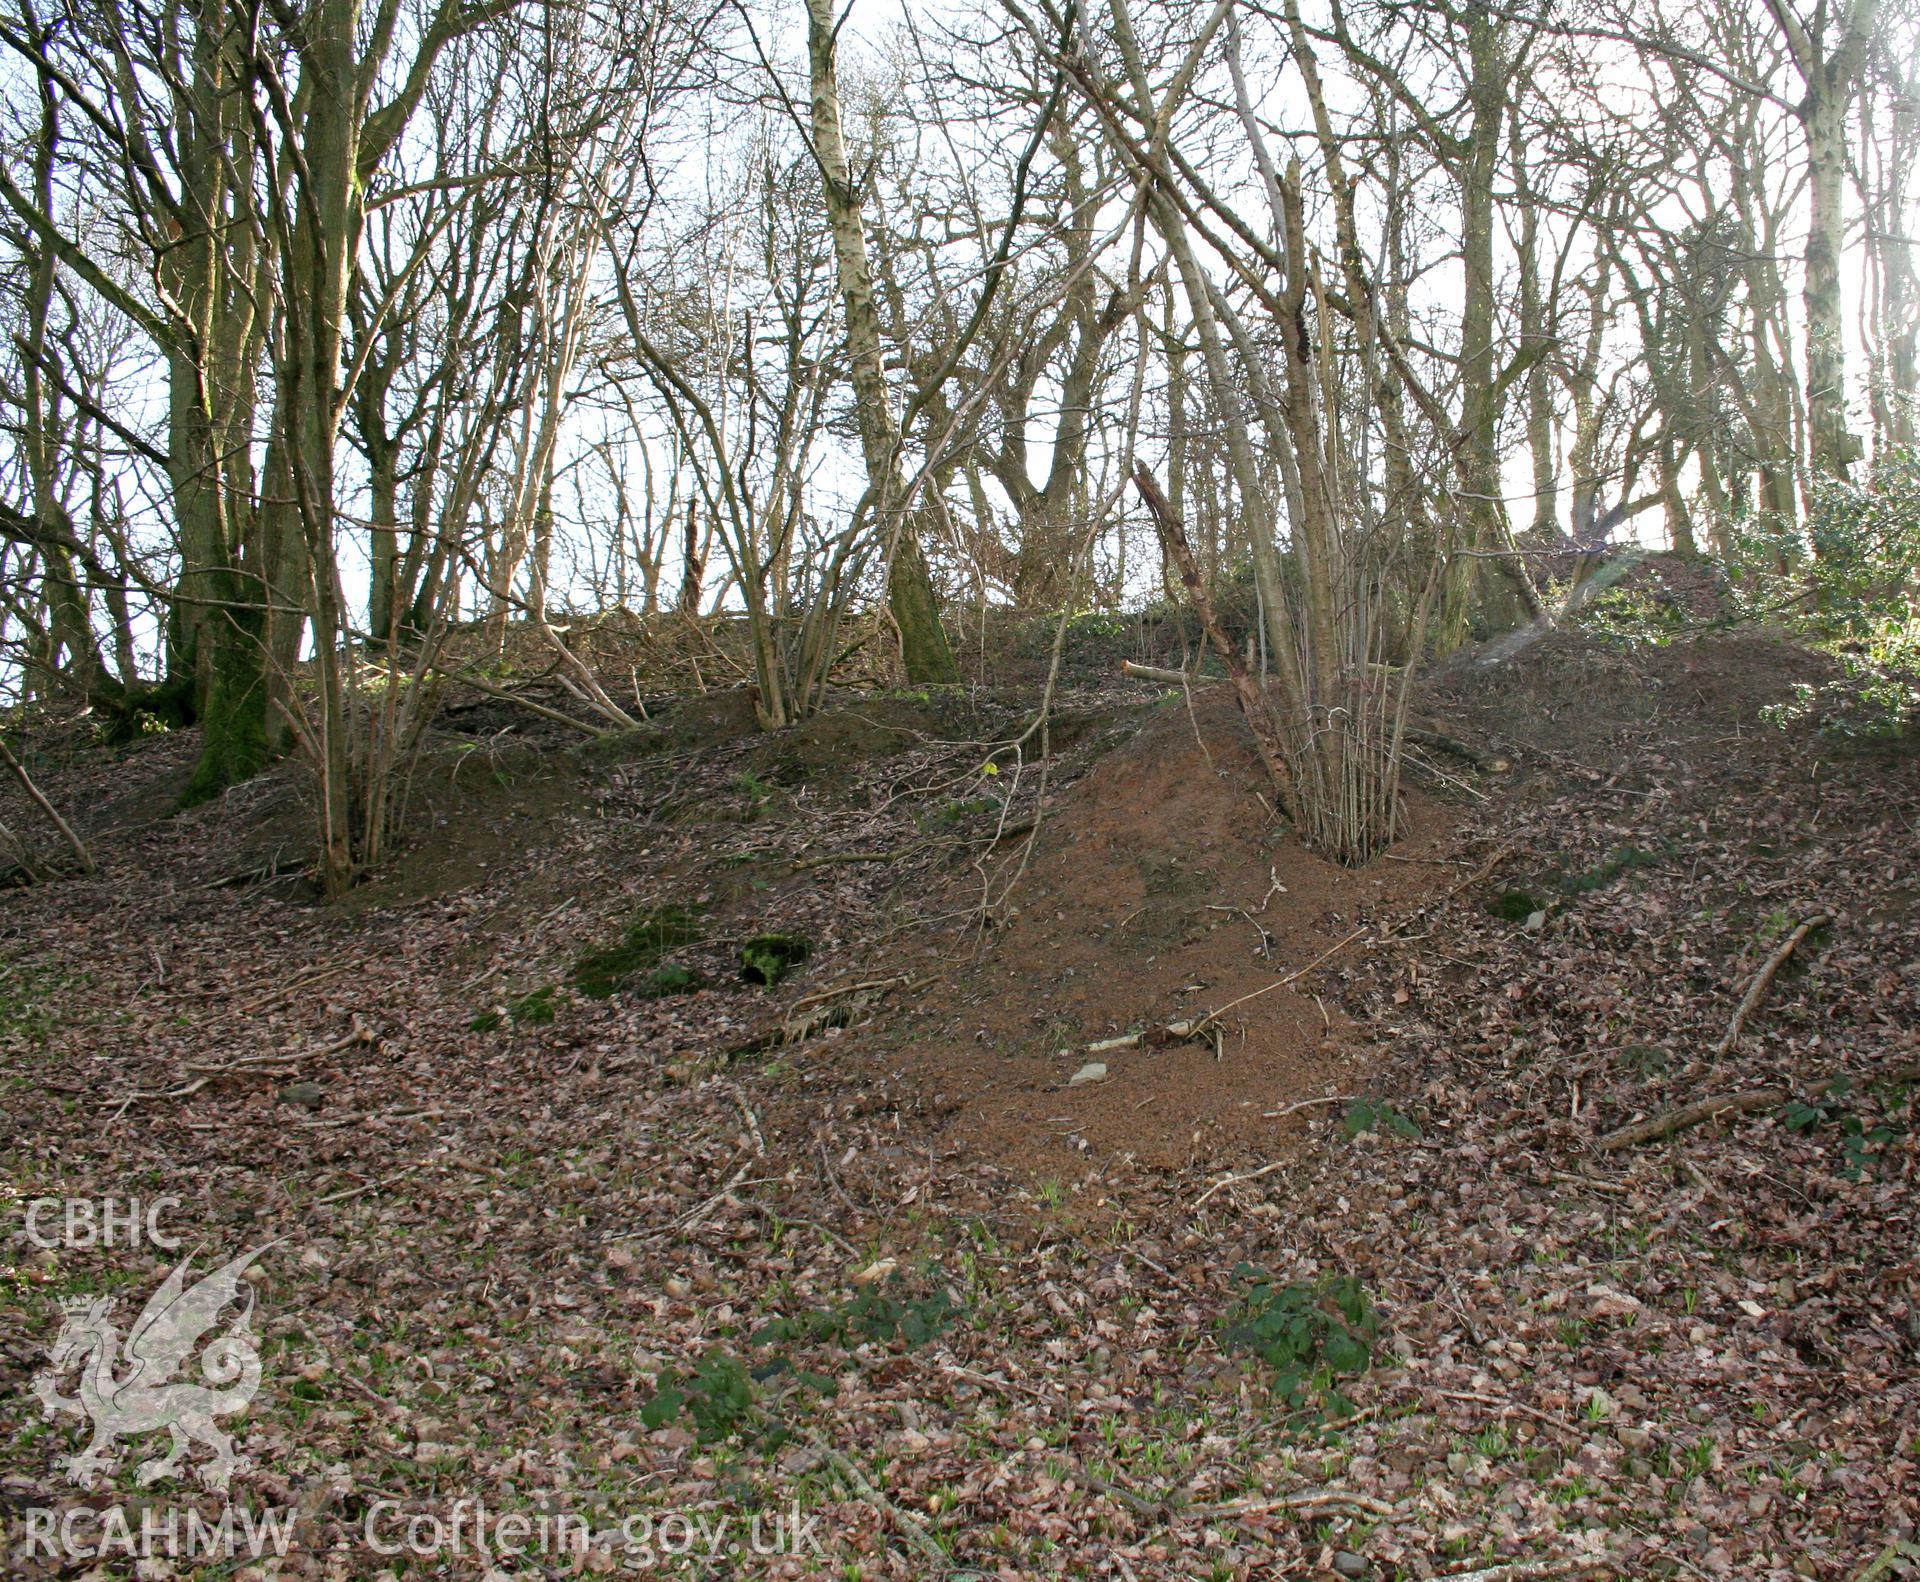 Gaer Fawr Hillfort.  Badger damage to ramparts on north side of fort, from the northwest.